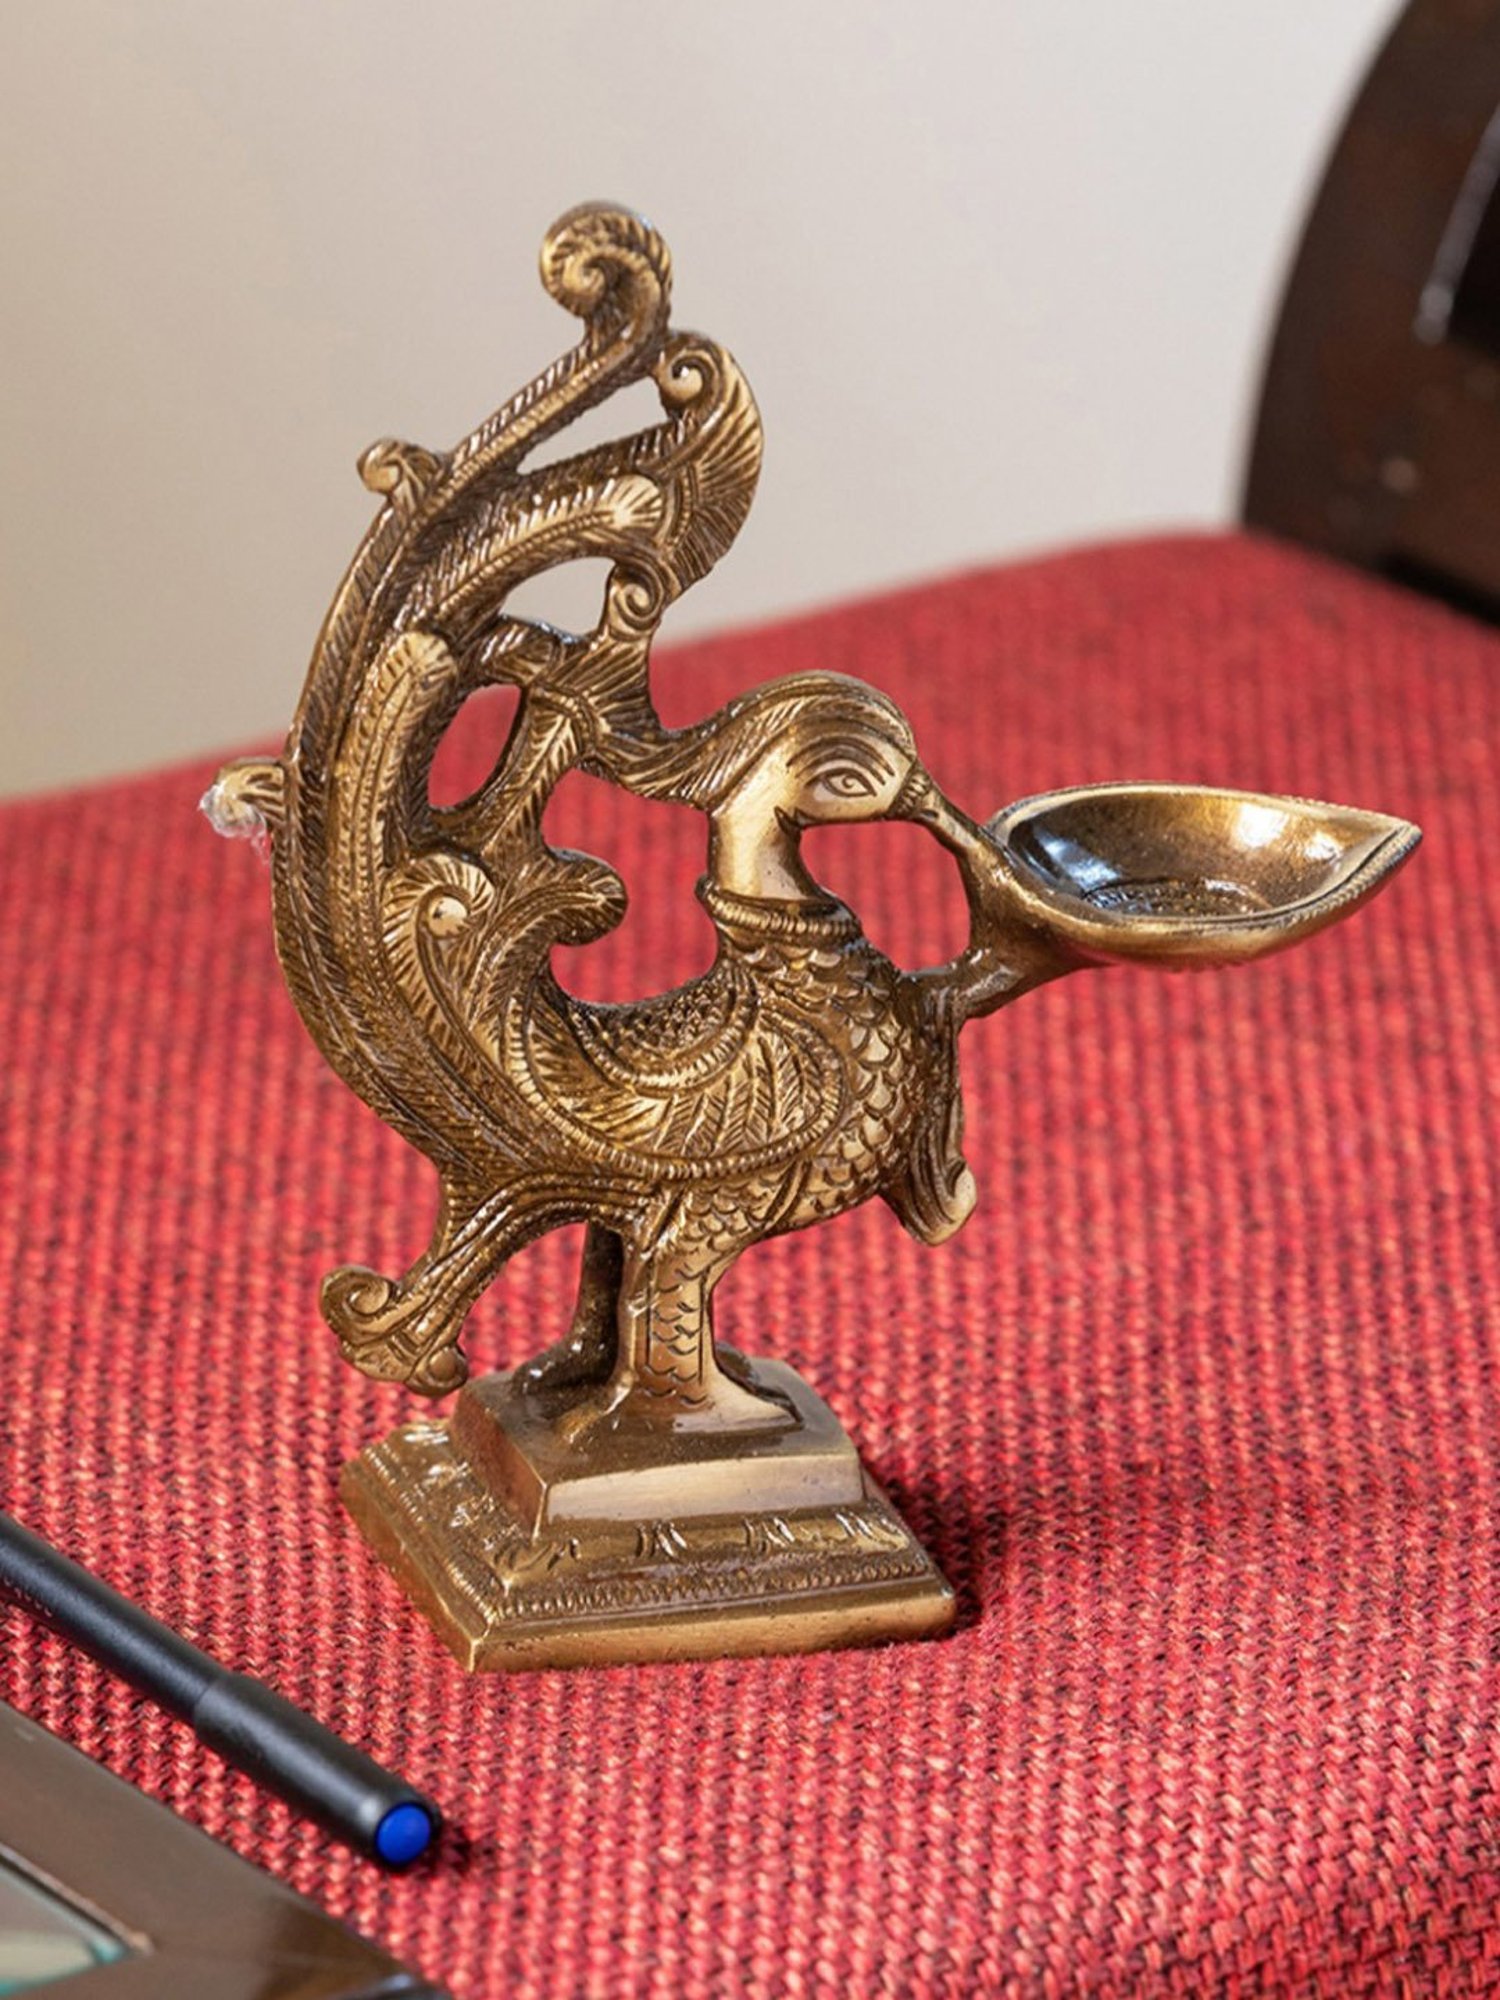 Buy ExclusiveLane Elegant Peacock Hand-Etched Gold Brass Hanging Bell at  Best Price @ Tata CLiQ